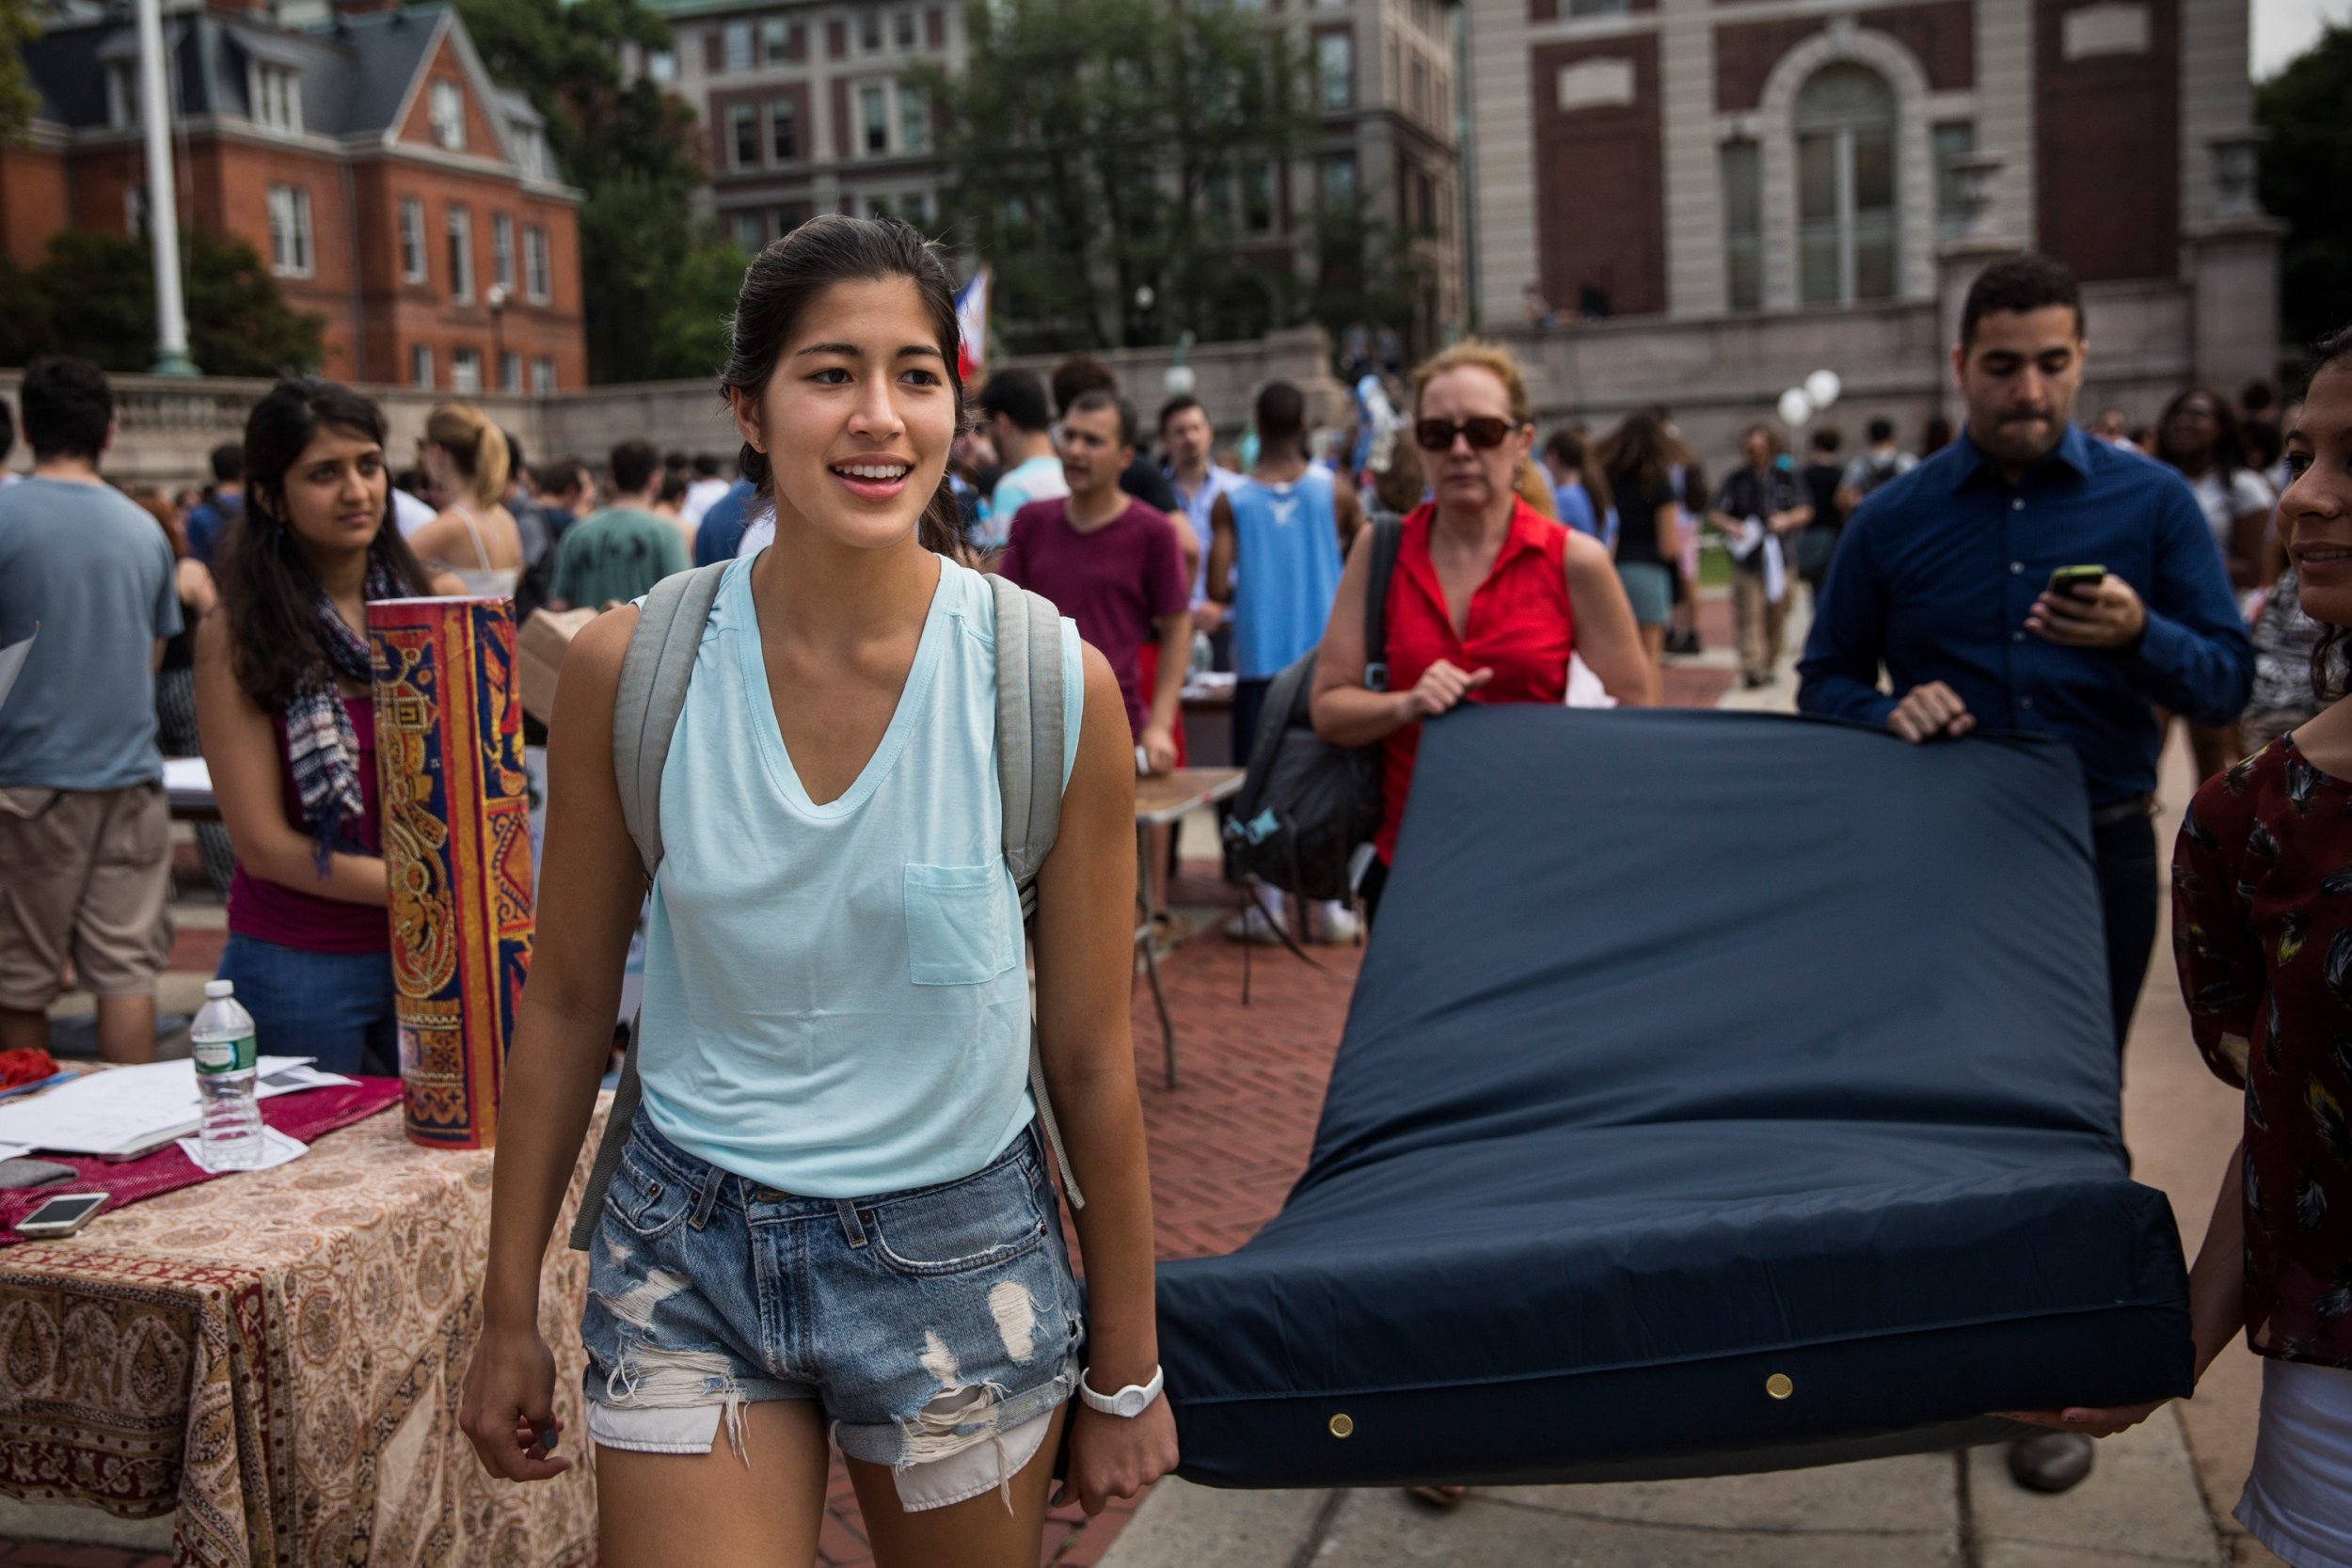 Emma Sulkowicz claims Paul Nungesser raped her and she later received cours...